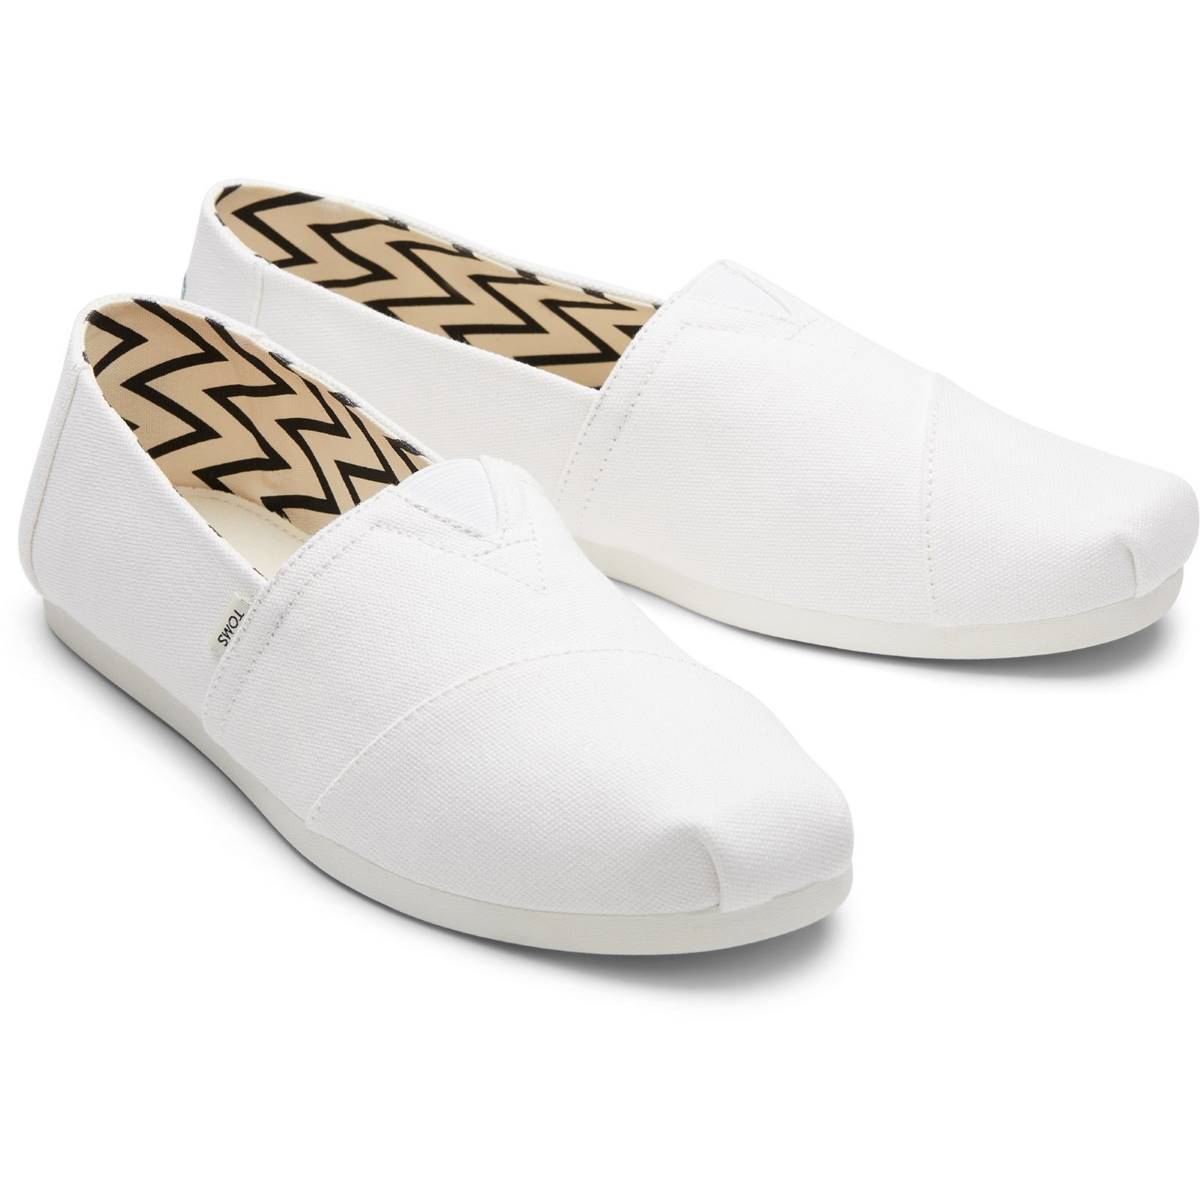 Toms Alpargata White Mens trainers 10017679 in a Plain Canvas in Size 12